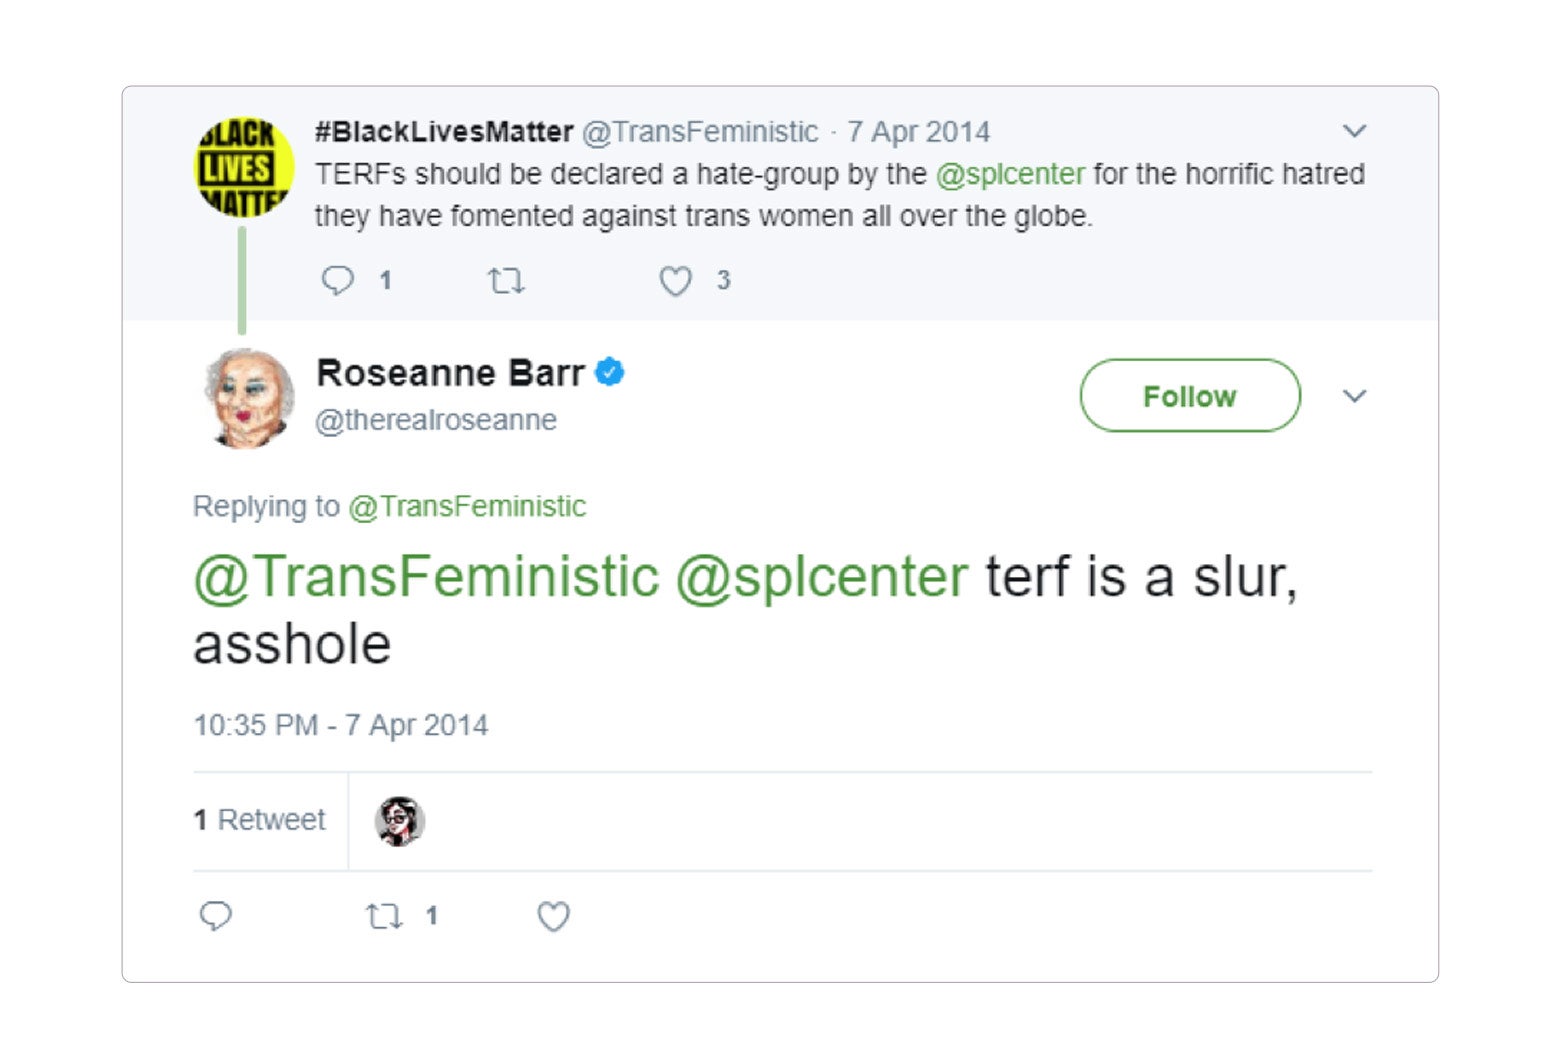 Roseanne’s deleted tweet, which reads: "terf is a slur, asshole."